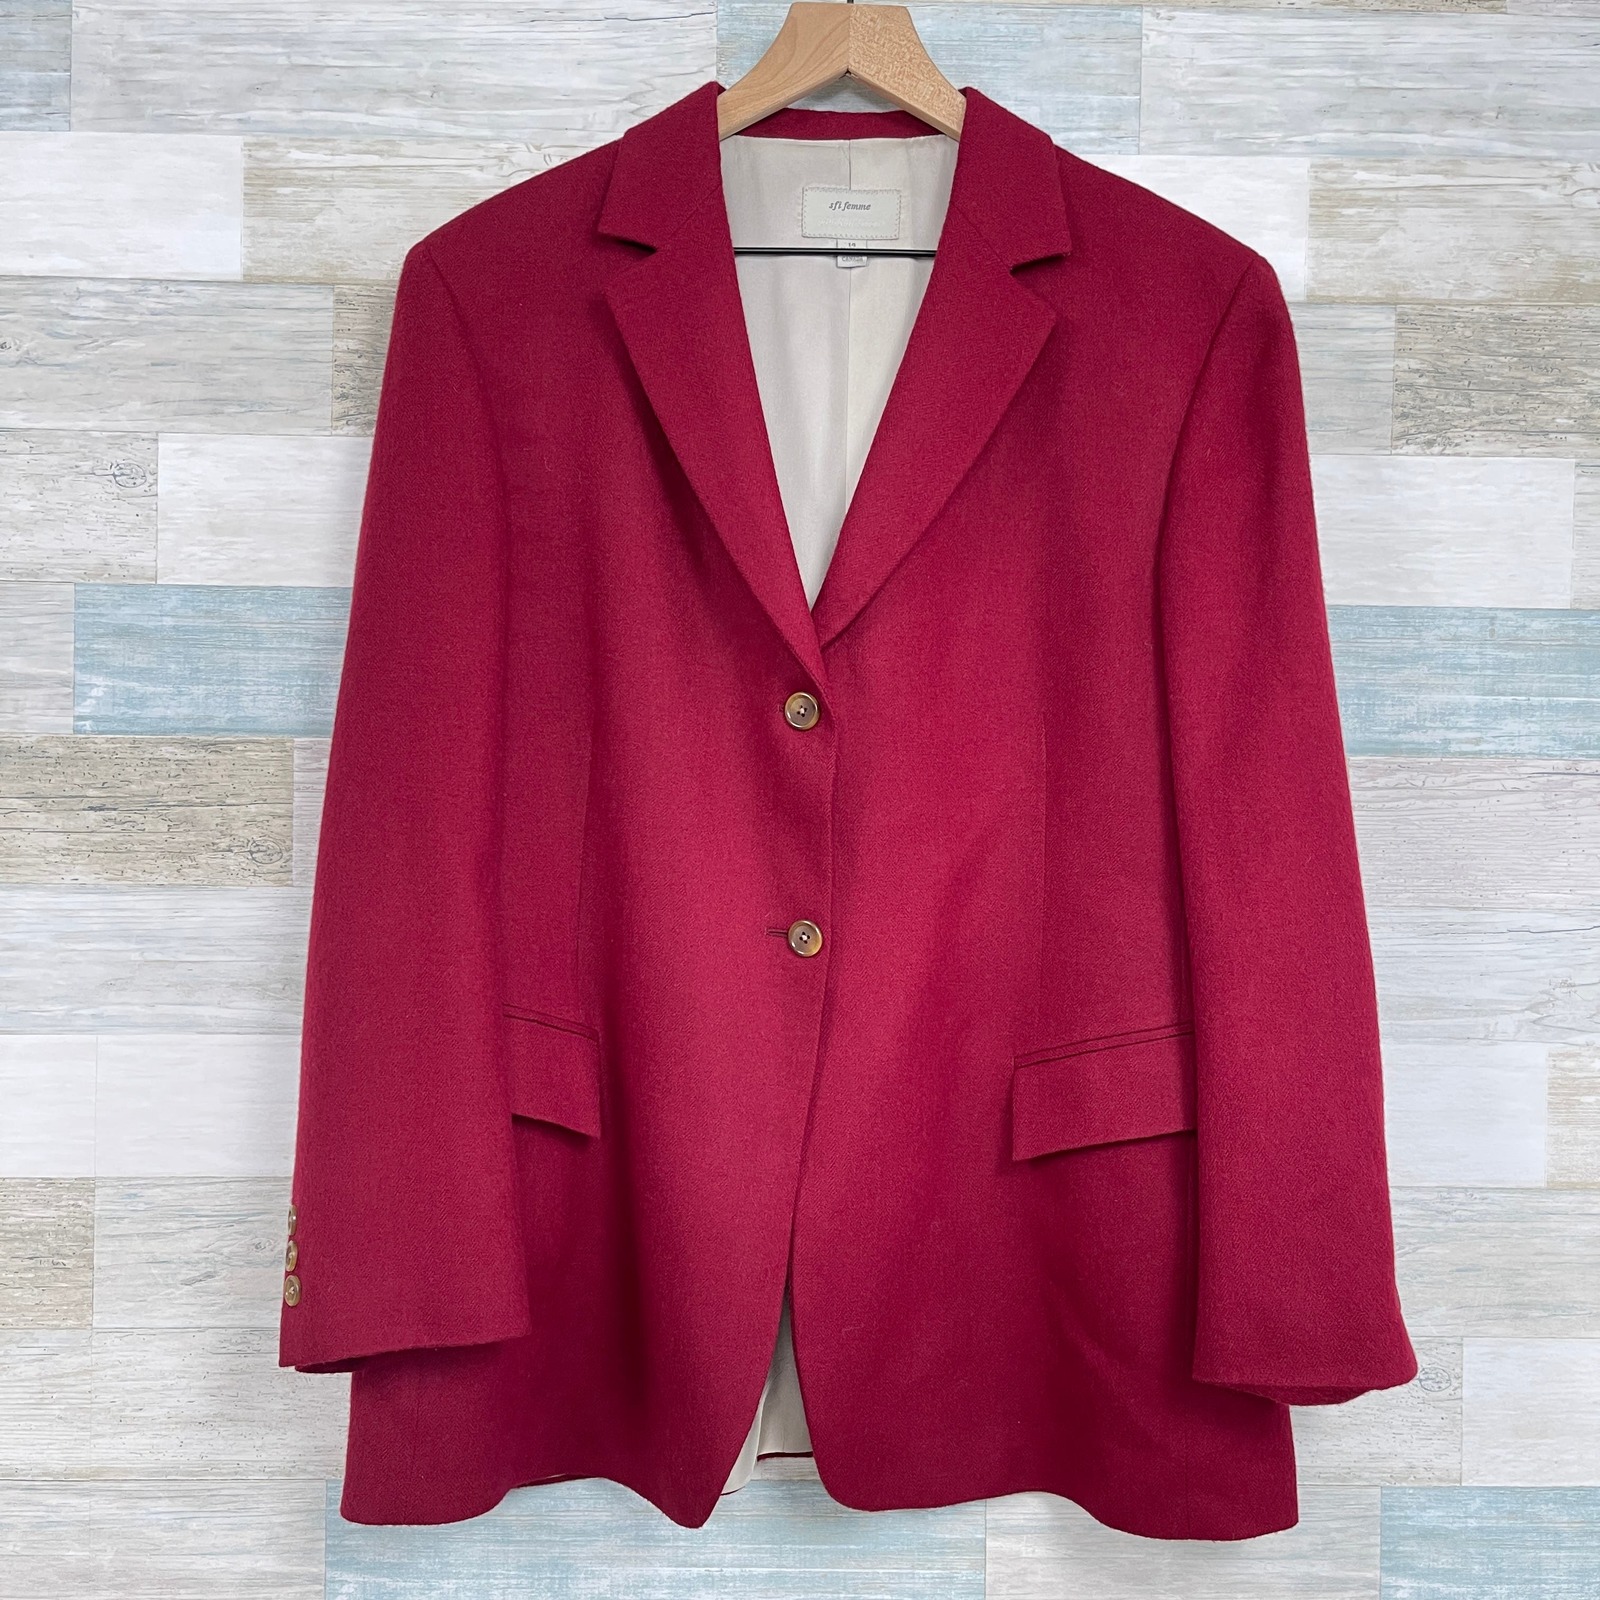 Primary image for Loro Piana Sfi Femme Nordstrom Worsted Camel Hair Blazer Red Longline Womens 14